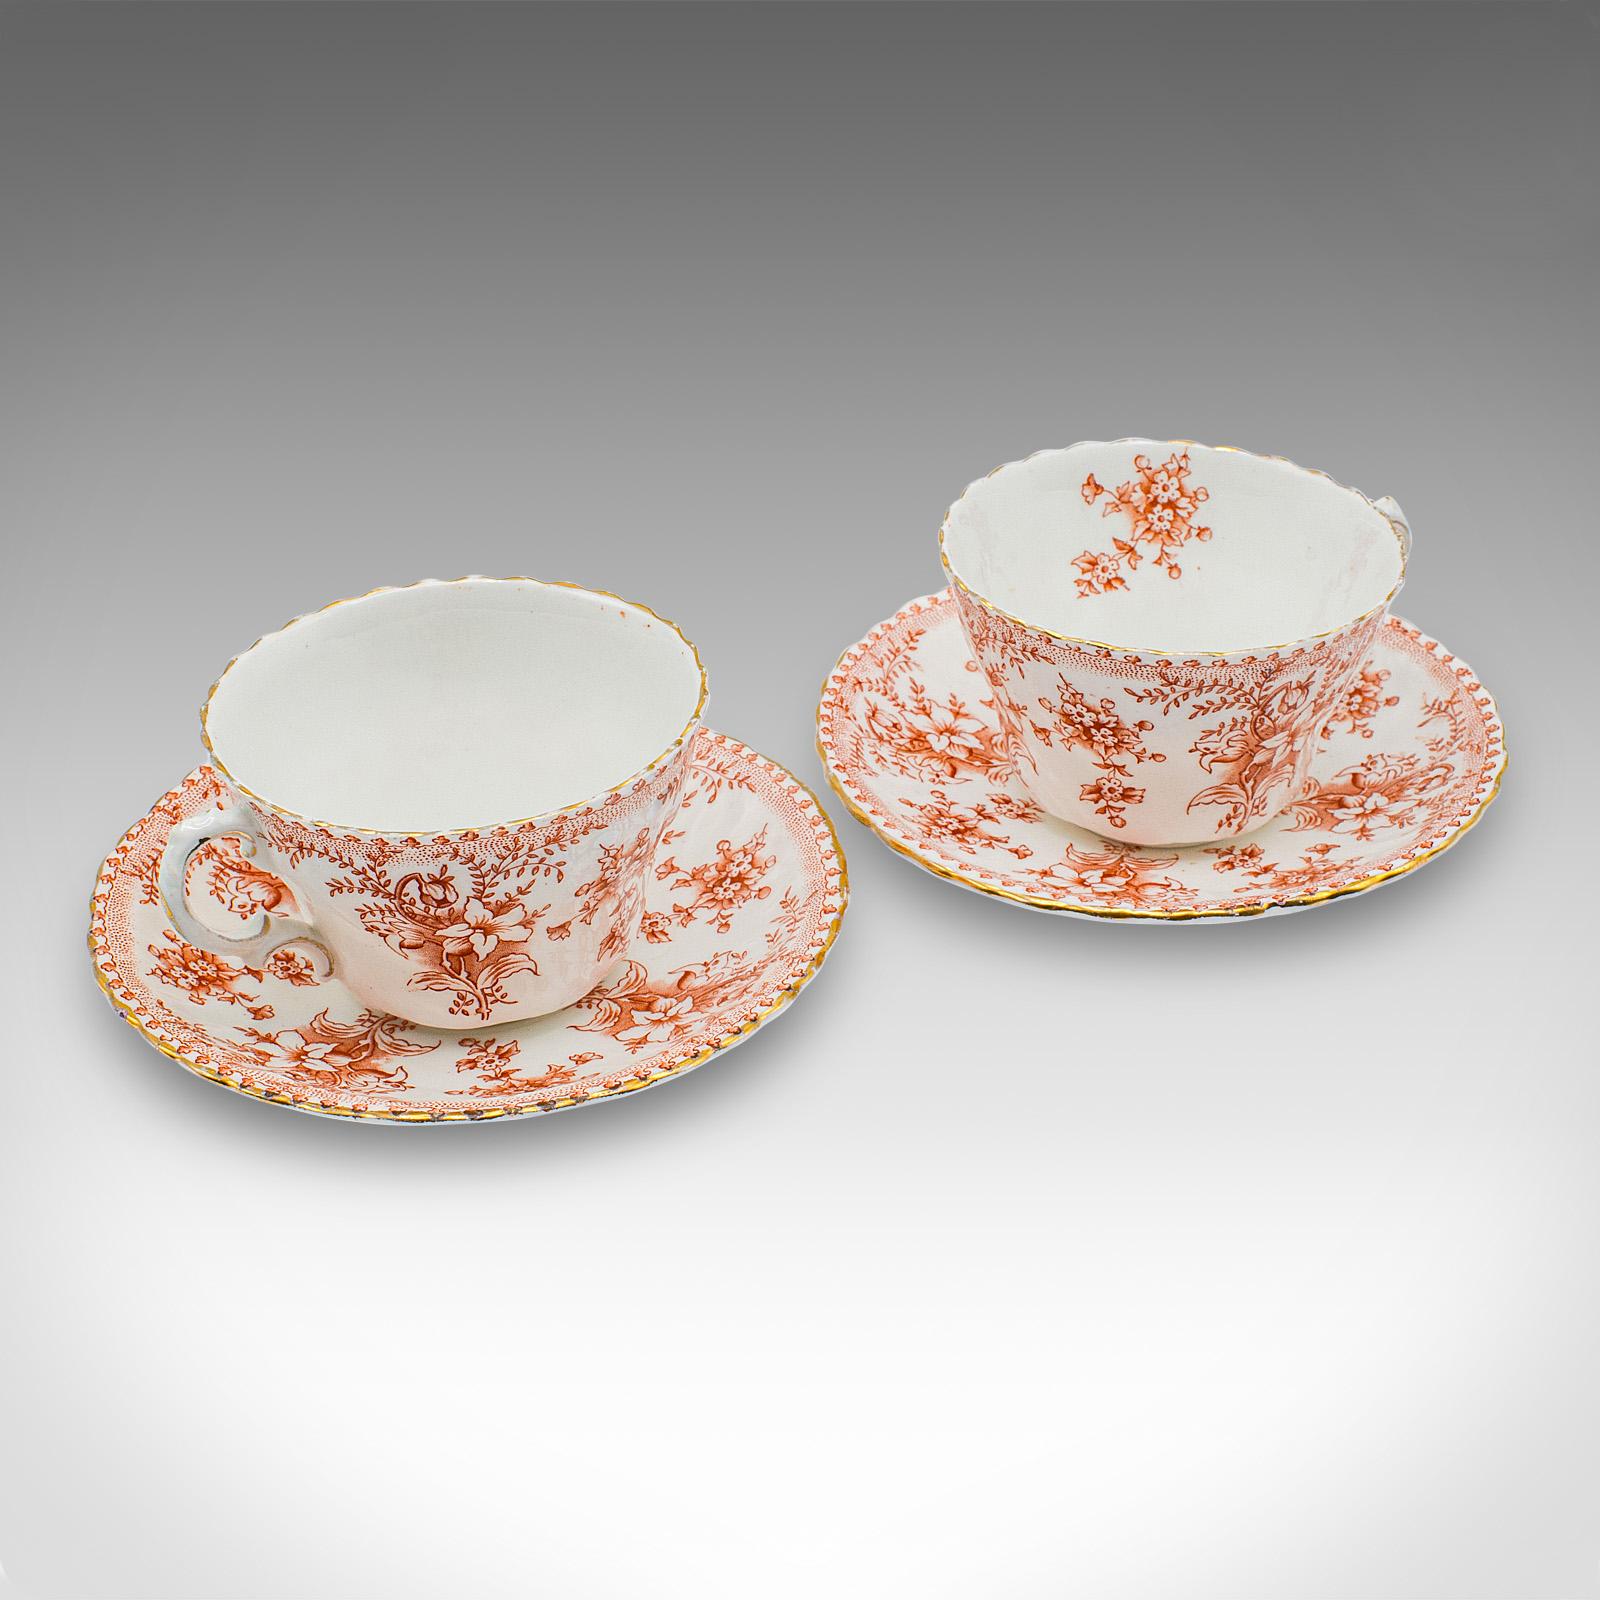 
This is an antique two-person afternoon tea set. An English, bone China cup and saucer, sandwich and cake plate duo, dating to the late Victorian period, circa 1900.

Pleasingly decorative duo set, with appealing pieces for two
Displaying a